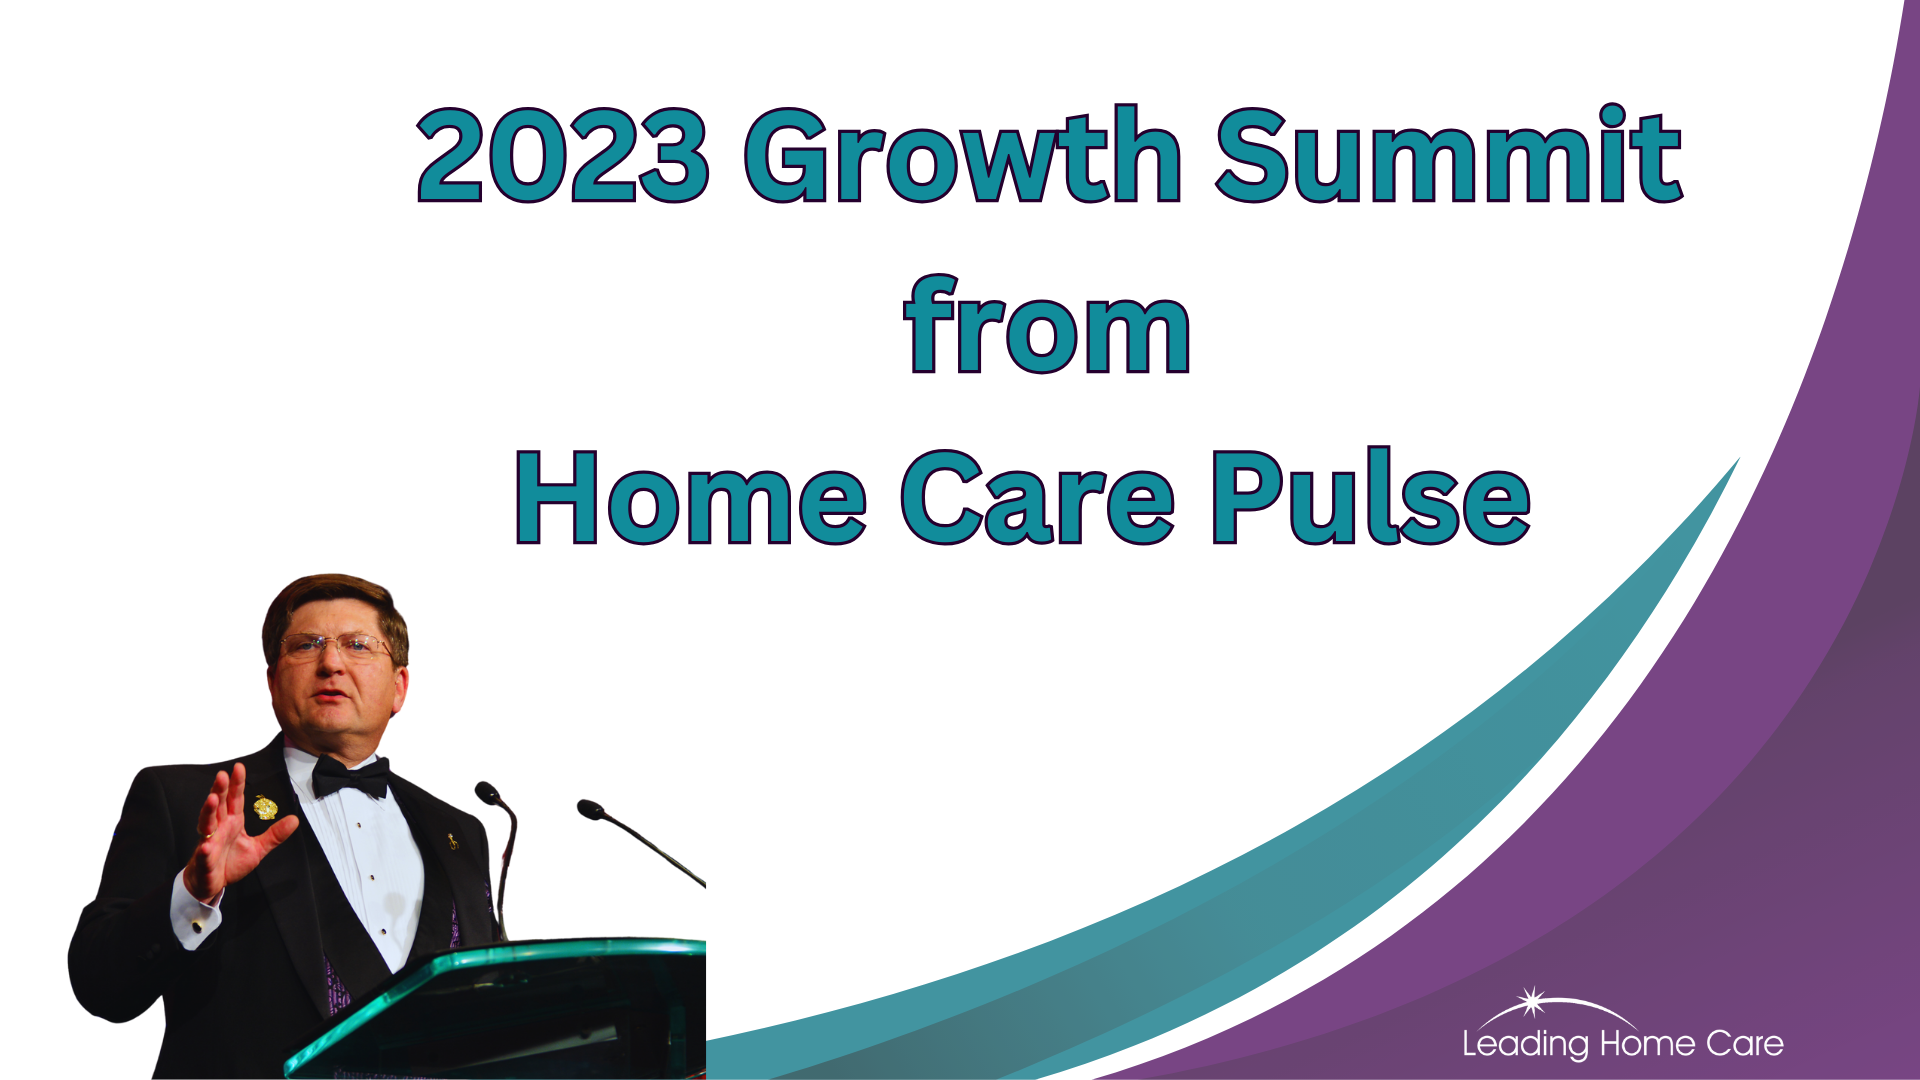 2023 Growth Summit from Home Care Pulse